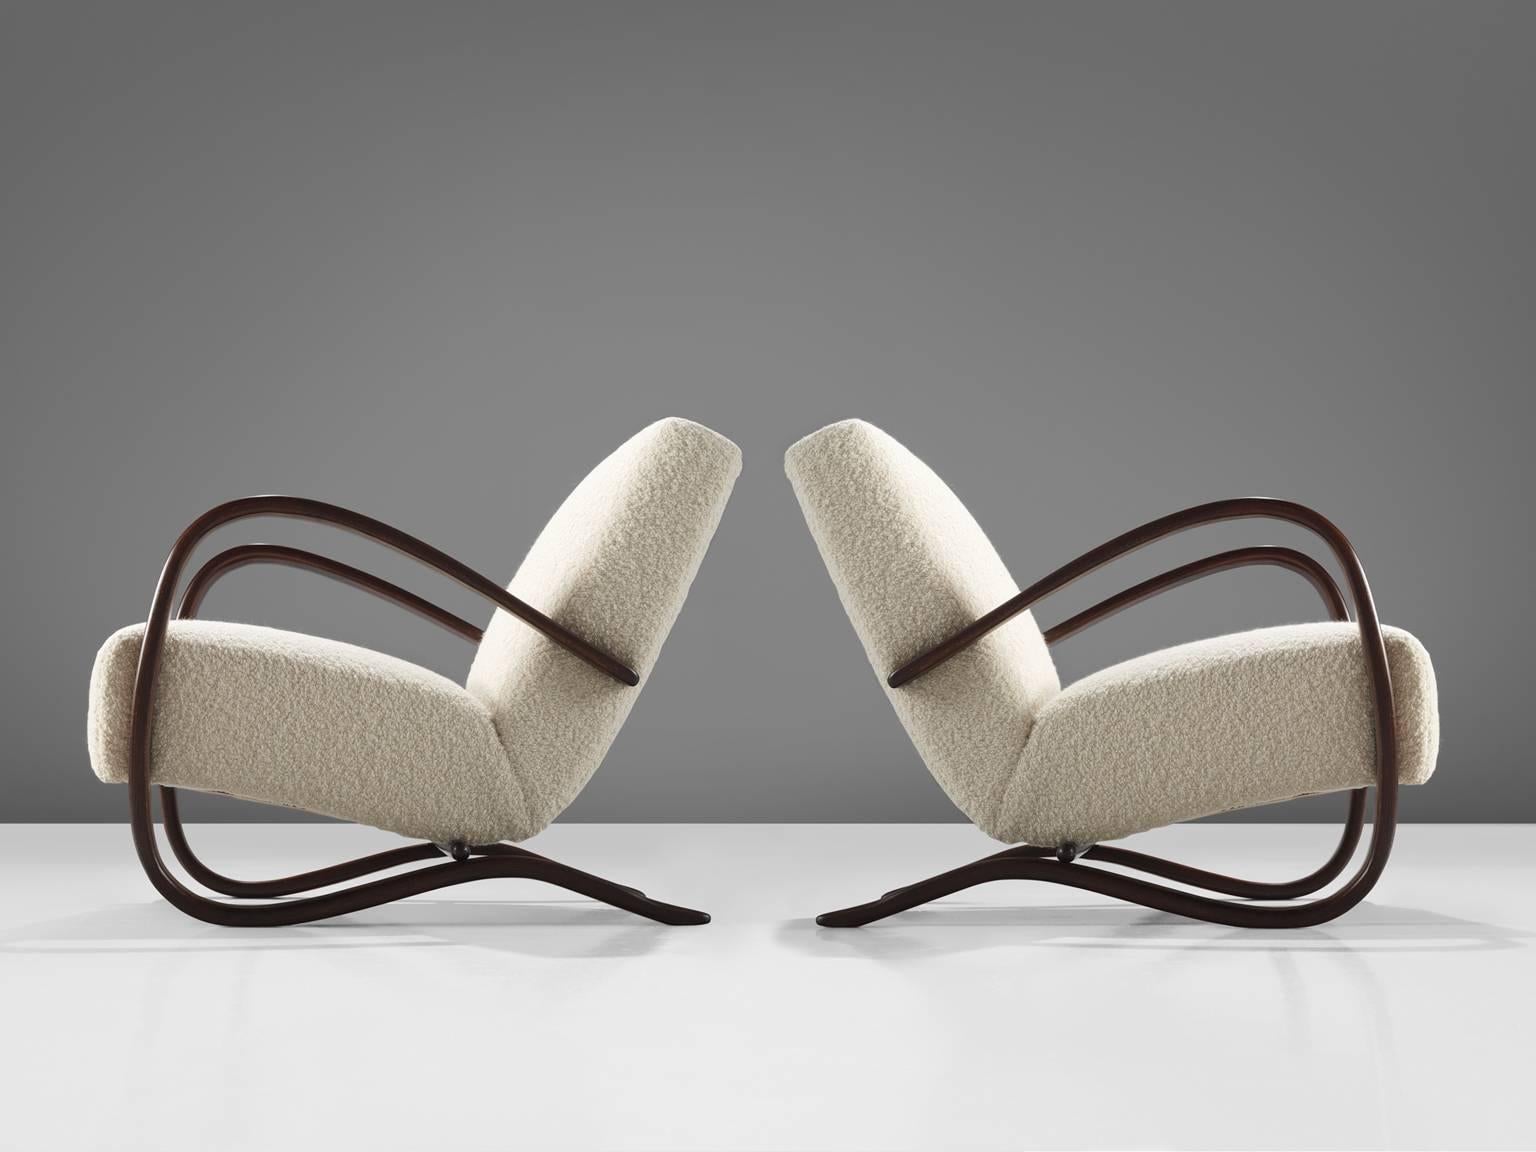 Jindrich Halabala, lounge chairs, Pierre Frey fabric and wood, Czech-Republic, 1930s 

This pair of Halabala chairs are upholstered in our own upholstery studio. The main feature of this chair by Hindrich Halabala are the voluptuous curved